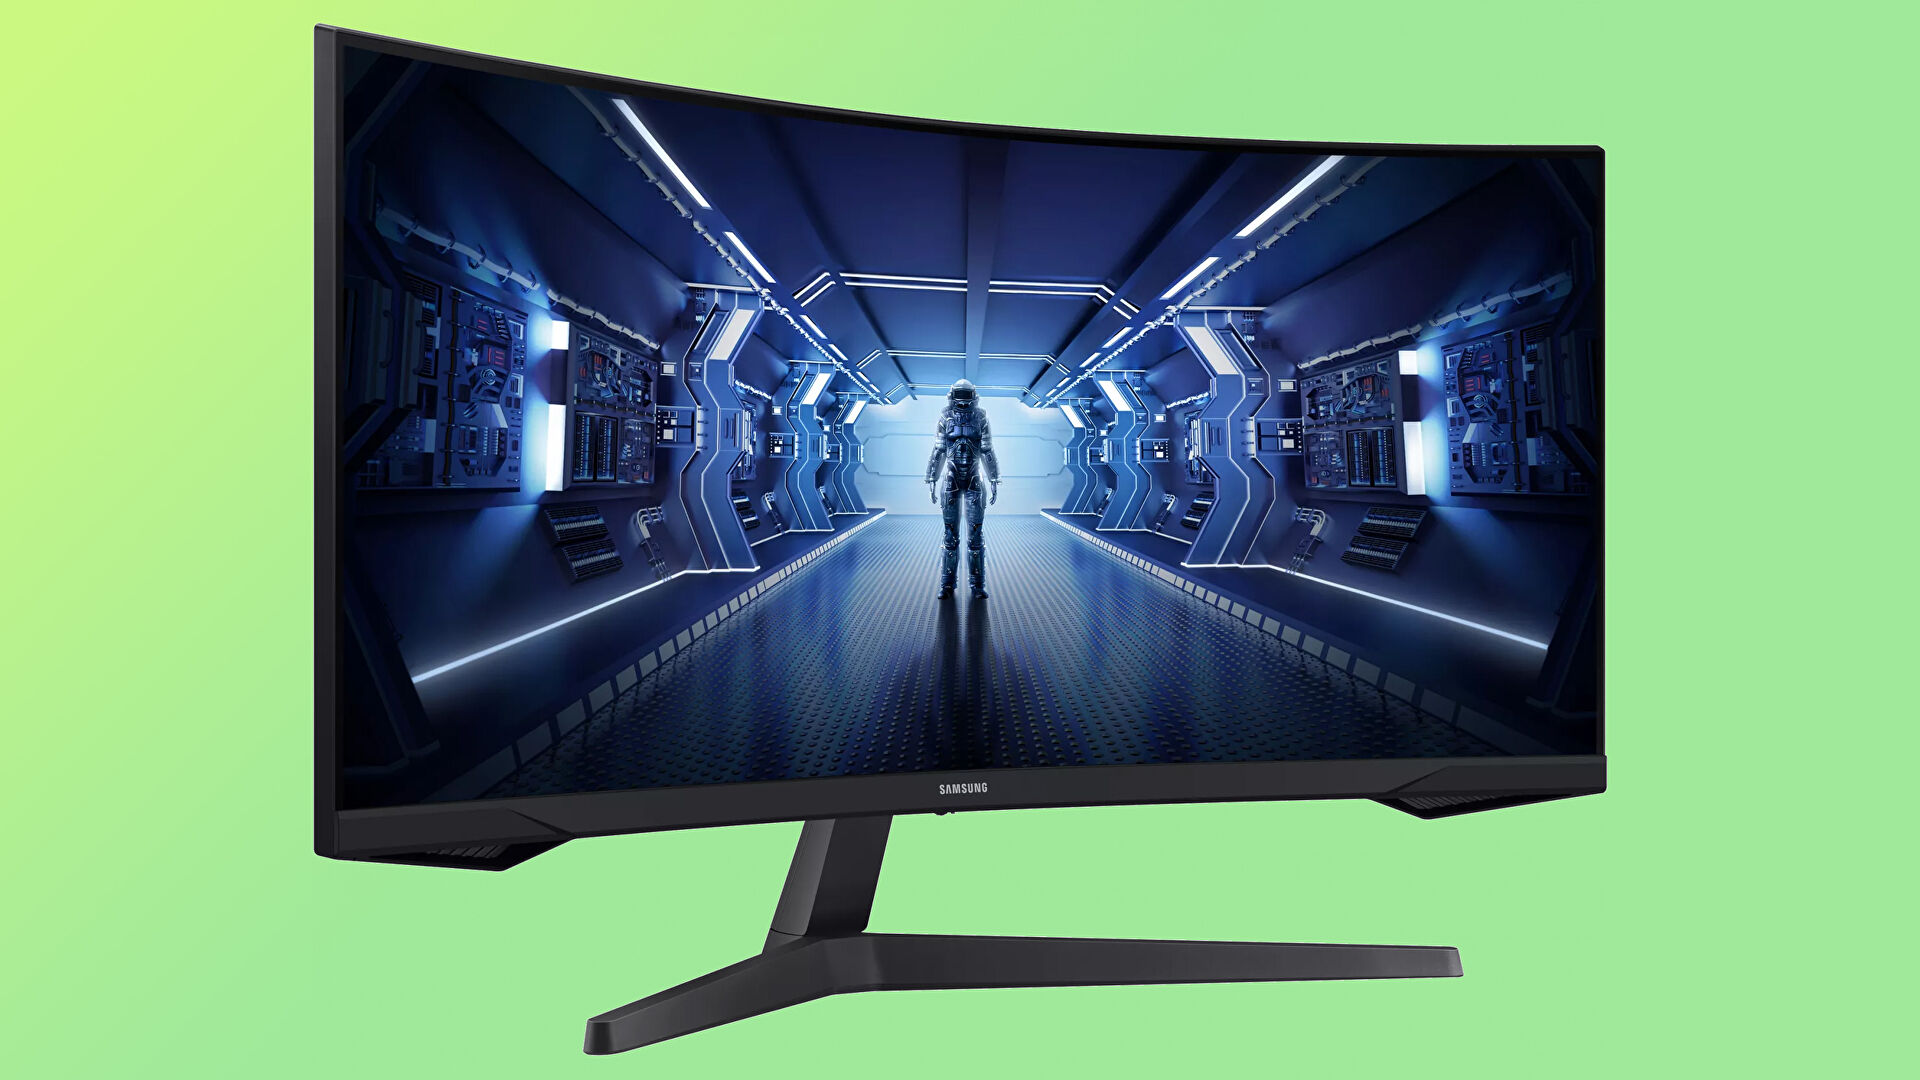 Pick up the 34-in Samsung Odyssey G5 gaming monitor for £327 with this code